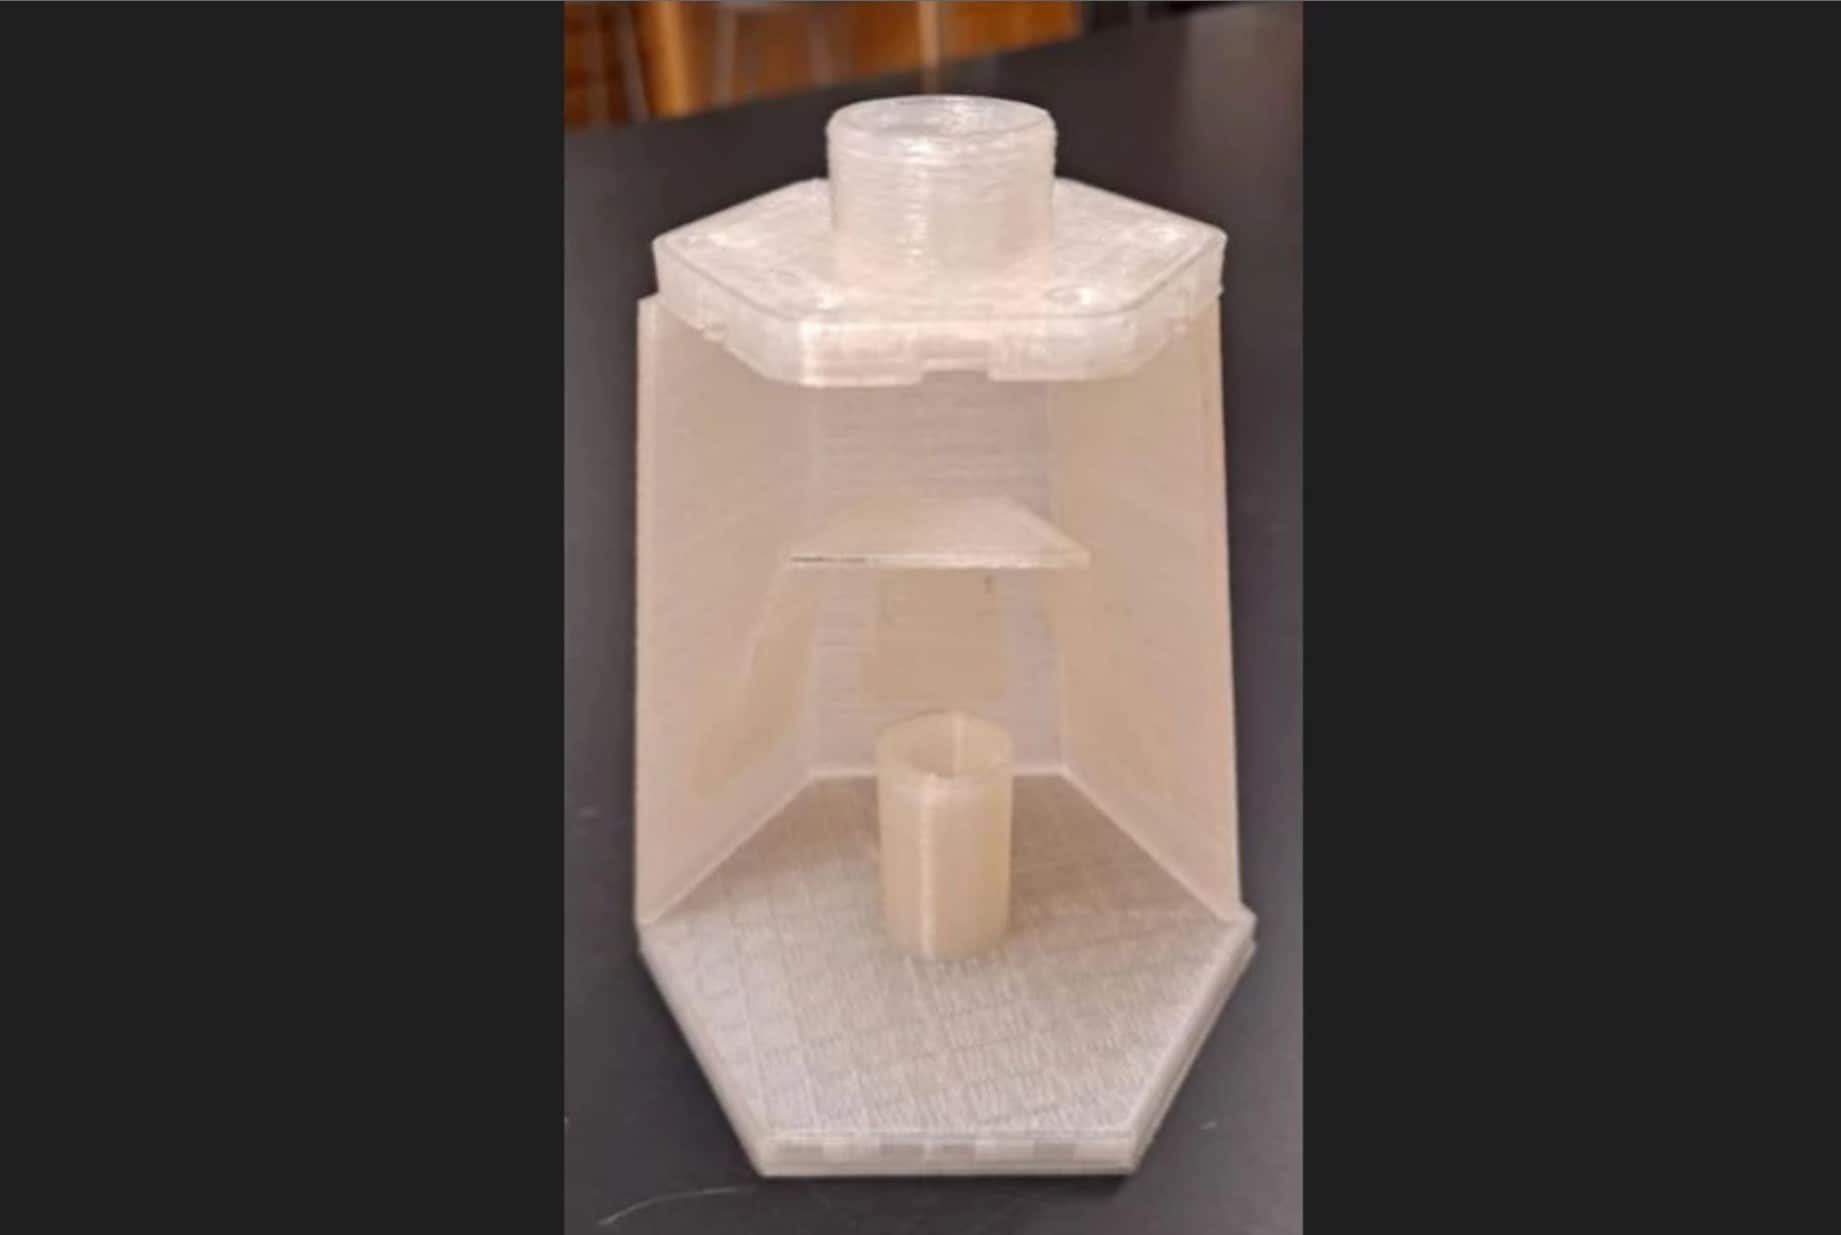 Students designed a low-cost filter to remove lead from tap water